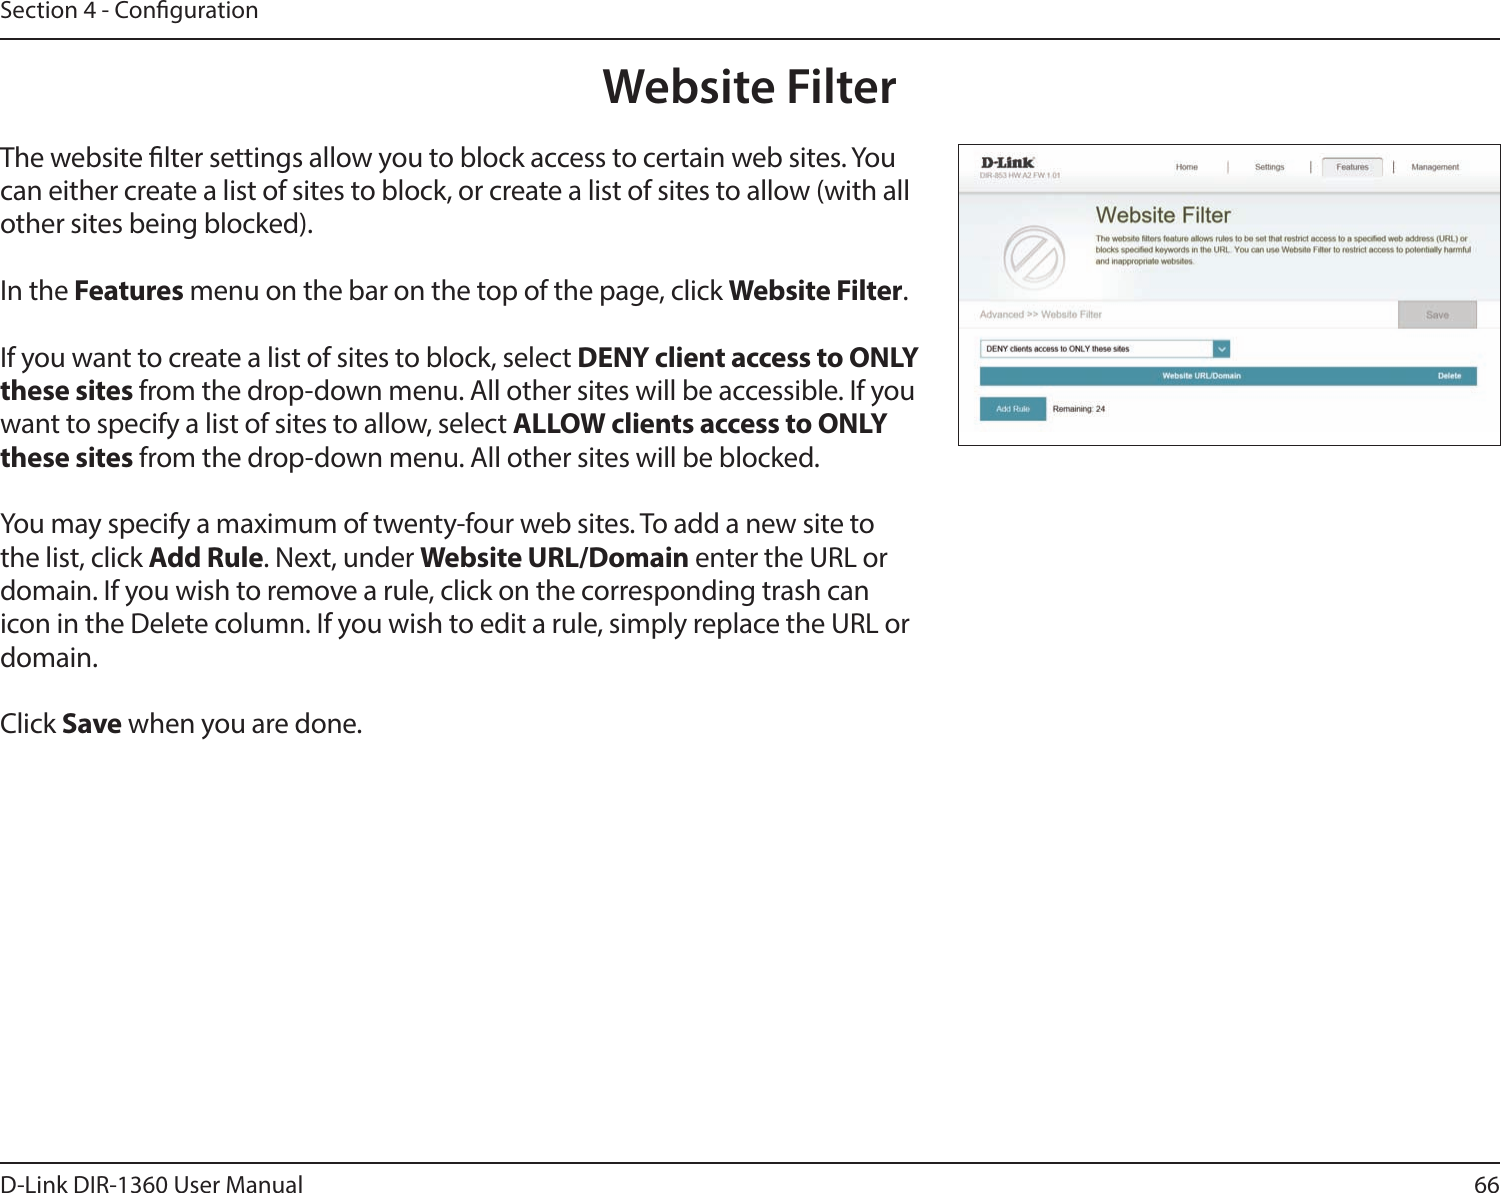 66D-Link DIR-1360 User ManualSection 4 - CongurationWebsite FilterThe website lter settings allow you to block access to certain web sites. You can either create a list of sites to block, or create a list of sites to allow (with all other sites being blocked).In the Features menu on the bar on the top of the page, click Website Filter.If you want to create a list of sites to block, select DENY client access to ONLY these sites from the drop-down menu. All other sites will be accessible. If you want to specify a list of sites to allow, select ALLOW clients access to ONLY these sites from the drop-down menu. All other sites will be blocked.You may specify a maximum of twenty-four web sites. To add a new site to the list, click Add Rule. Next, under Website URL/Domain enter the URL or domain. If you wish to remove a rule, click on the corresponding trash can icon in the Delete column. If you wish to edit a rule, simply replace the URL or domain.Click Save when you are done.